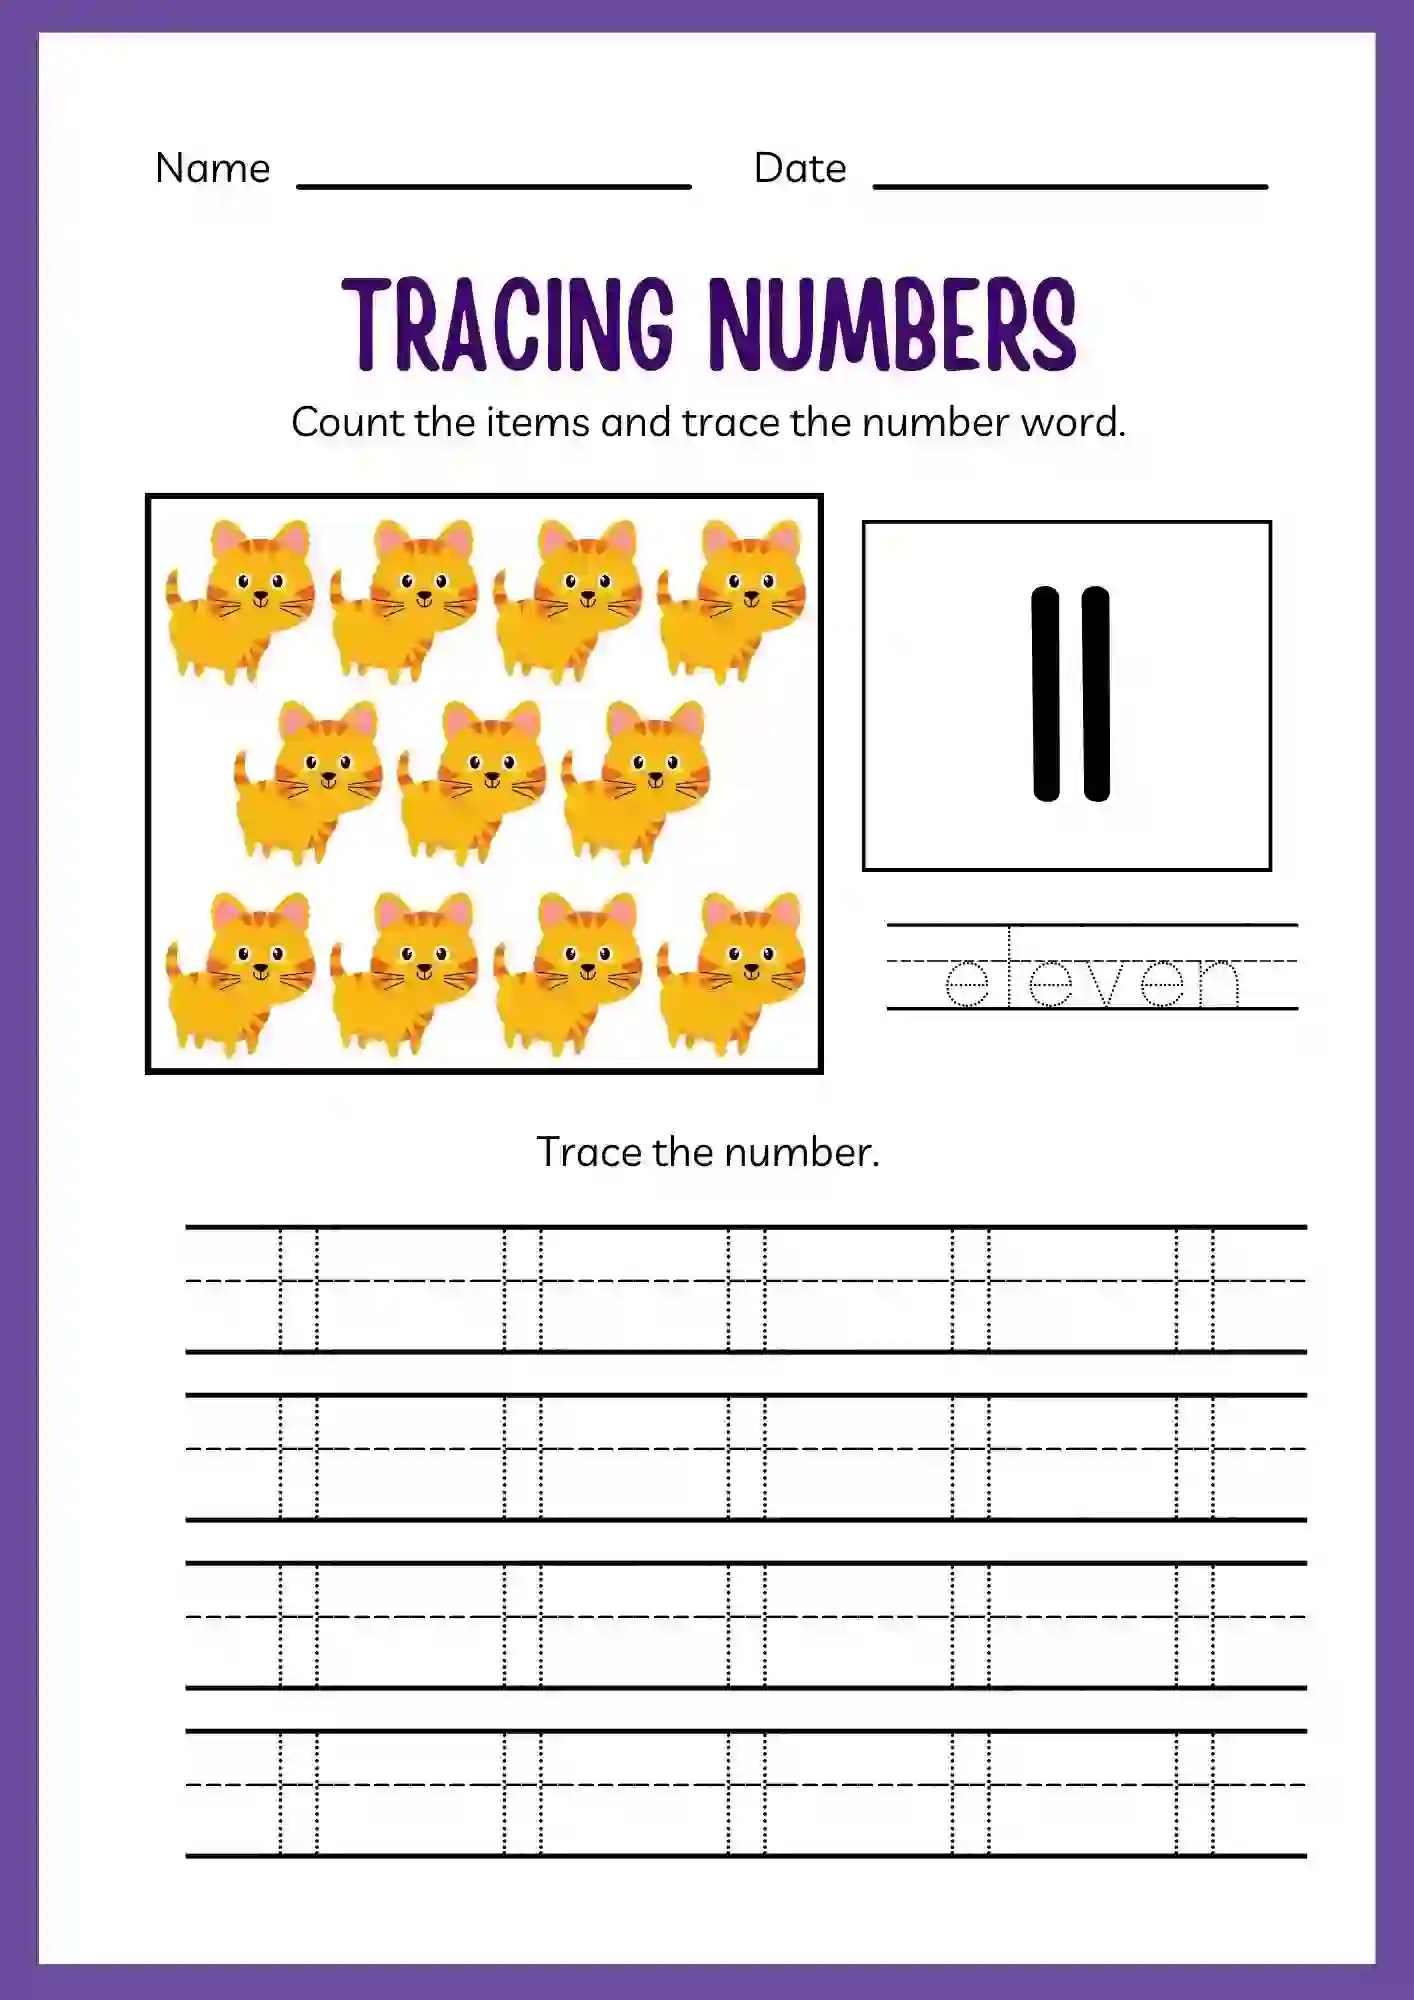 Number Tracing Worksheets 1 to 20 (Number 11 tracing sheet)